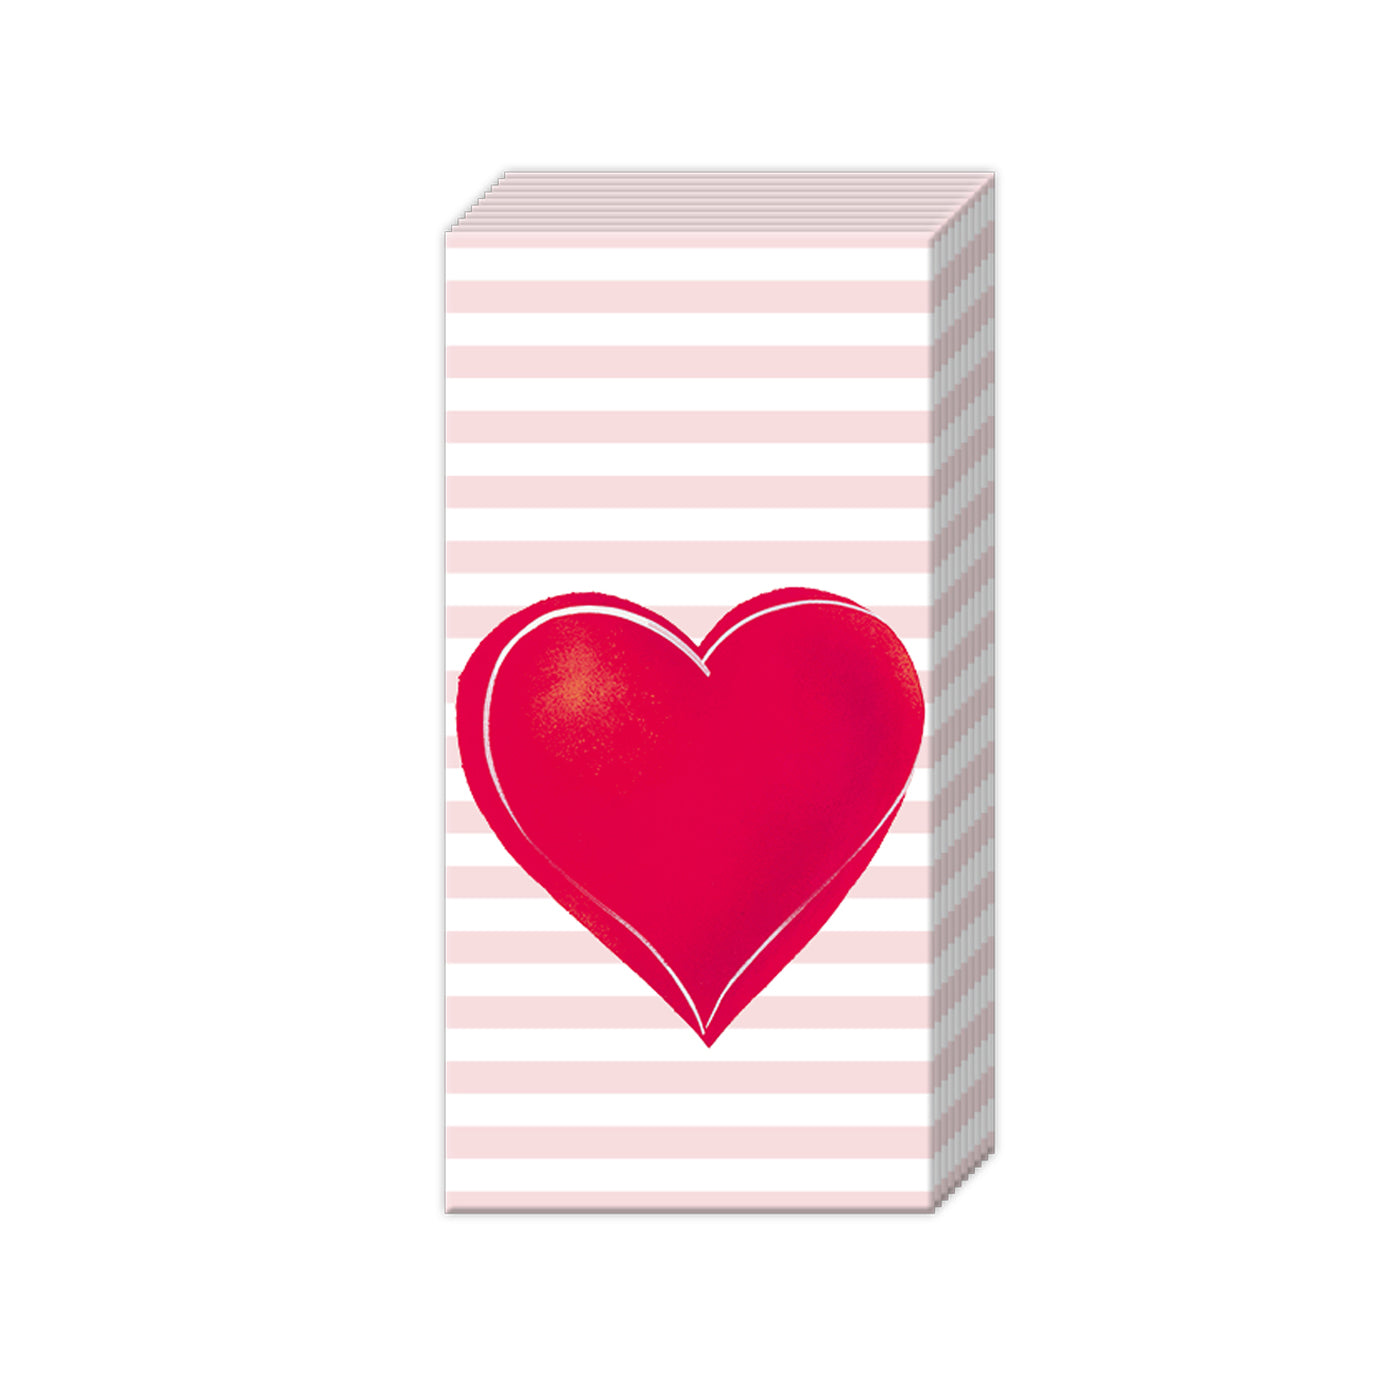 All You Need in Love Paper Pocket Tissues